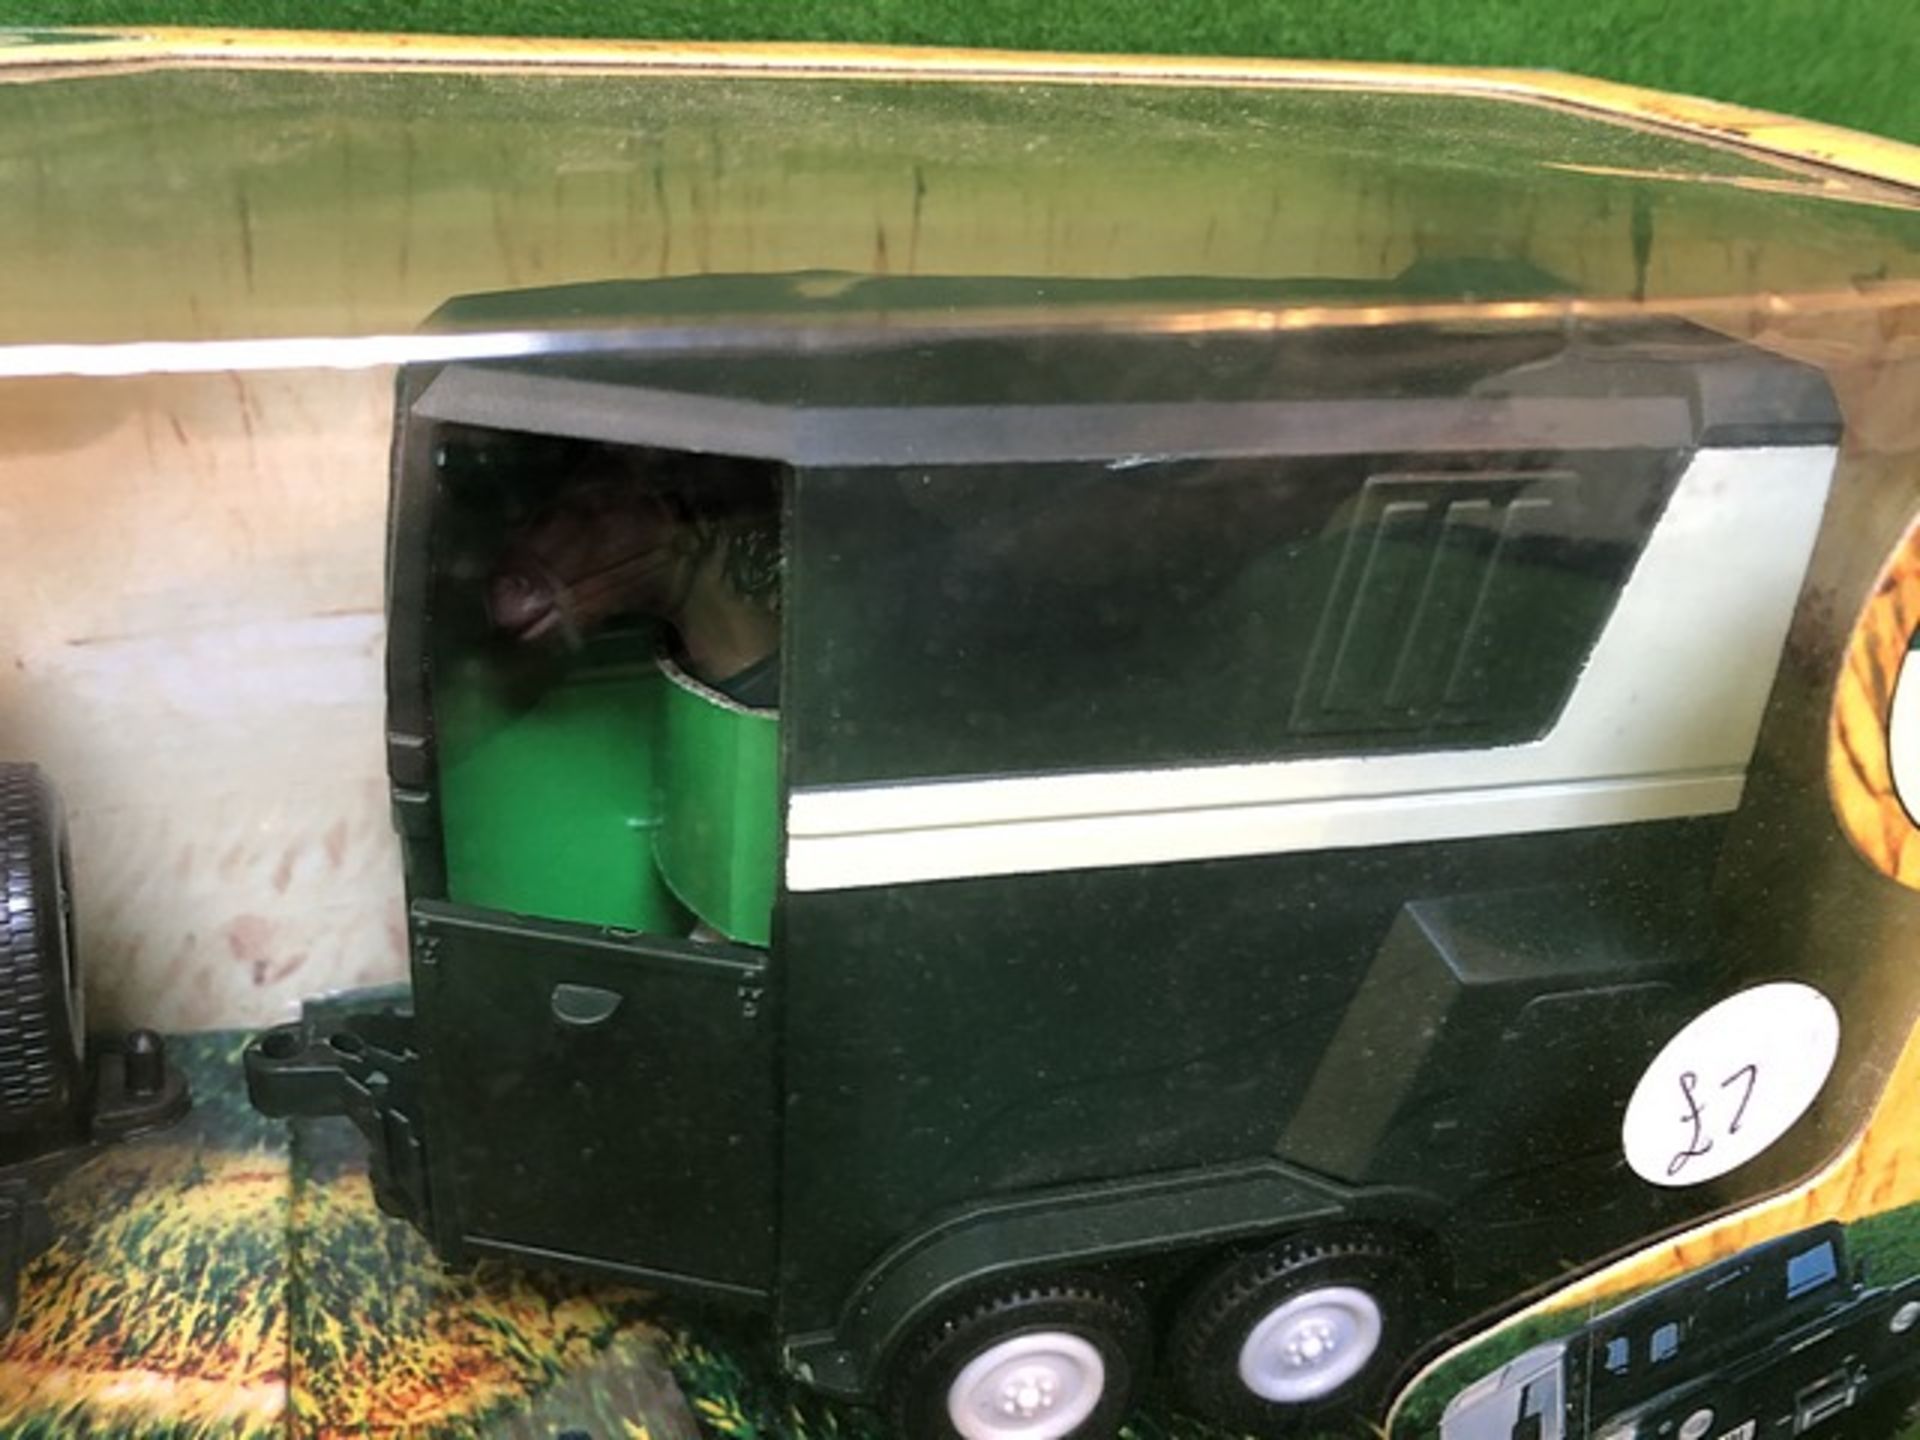 Halsall Diecast Land Rover Defender And Plastic Horse Box With Horse Complete Inbox - Image 2 of 3